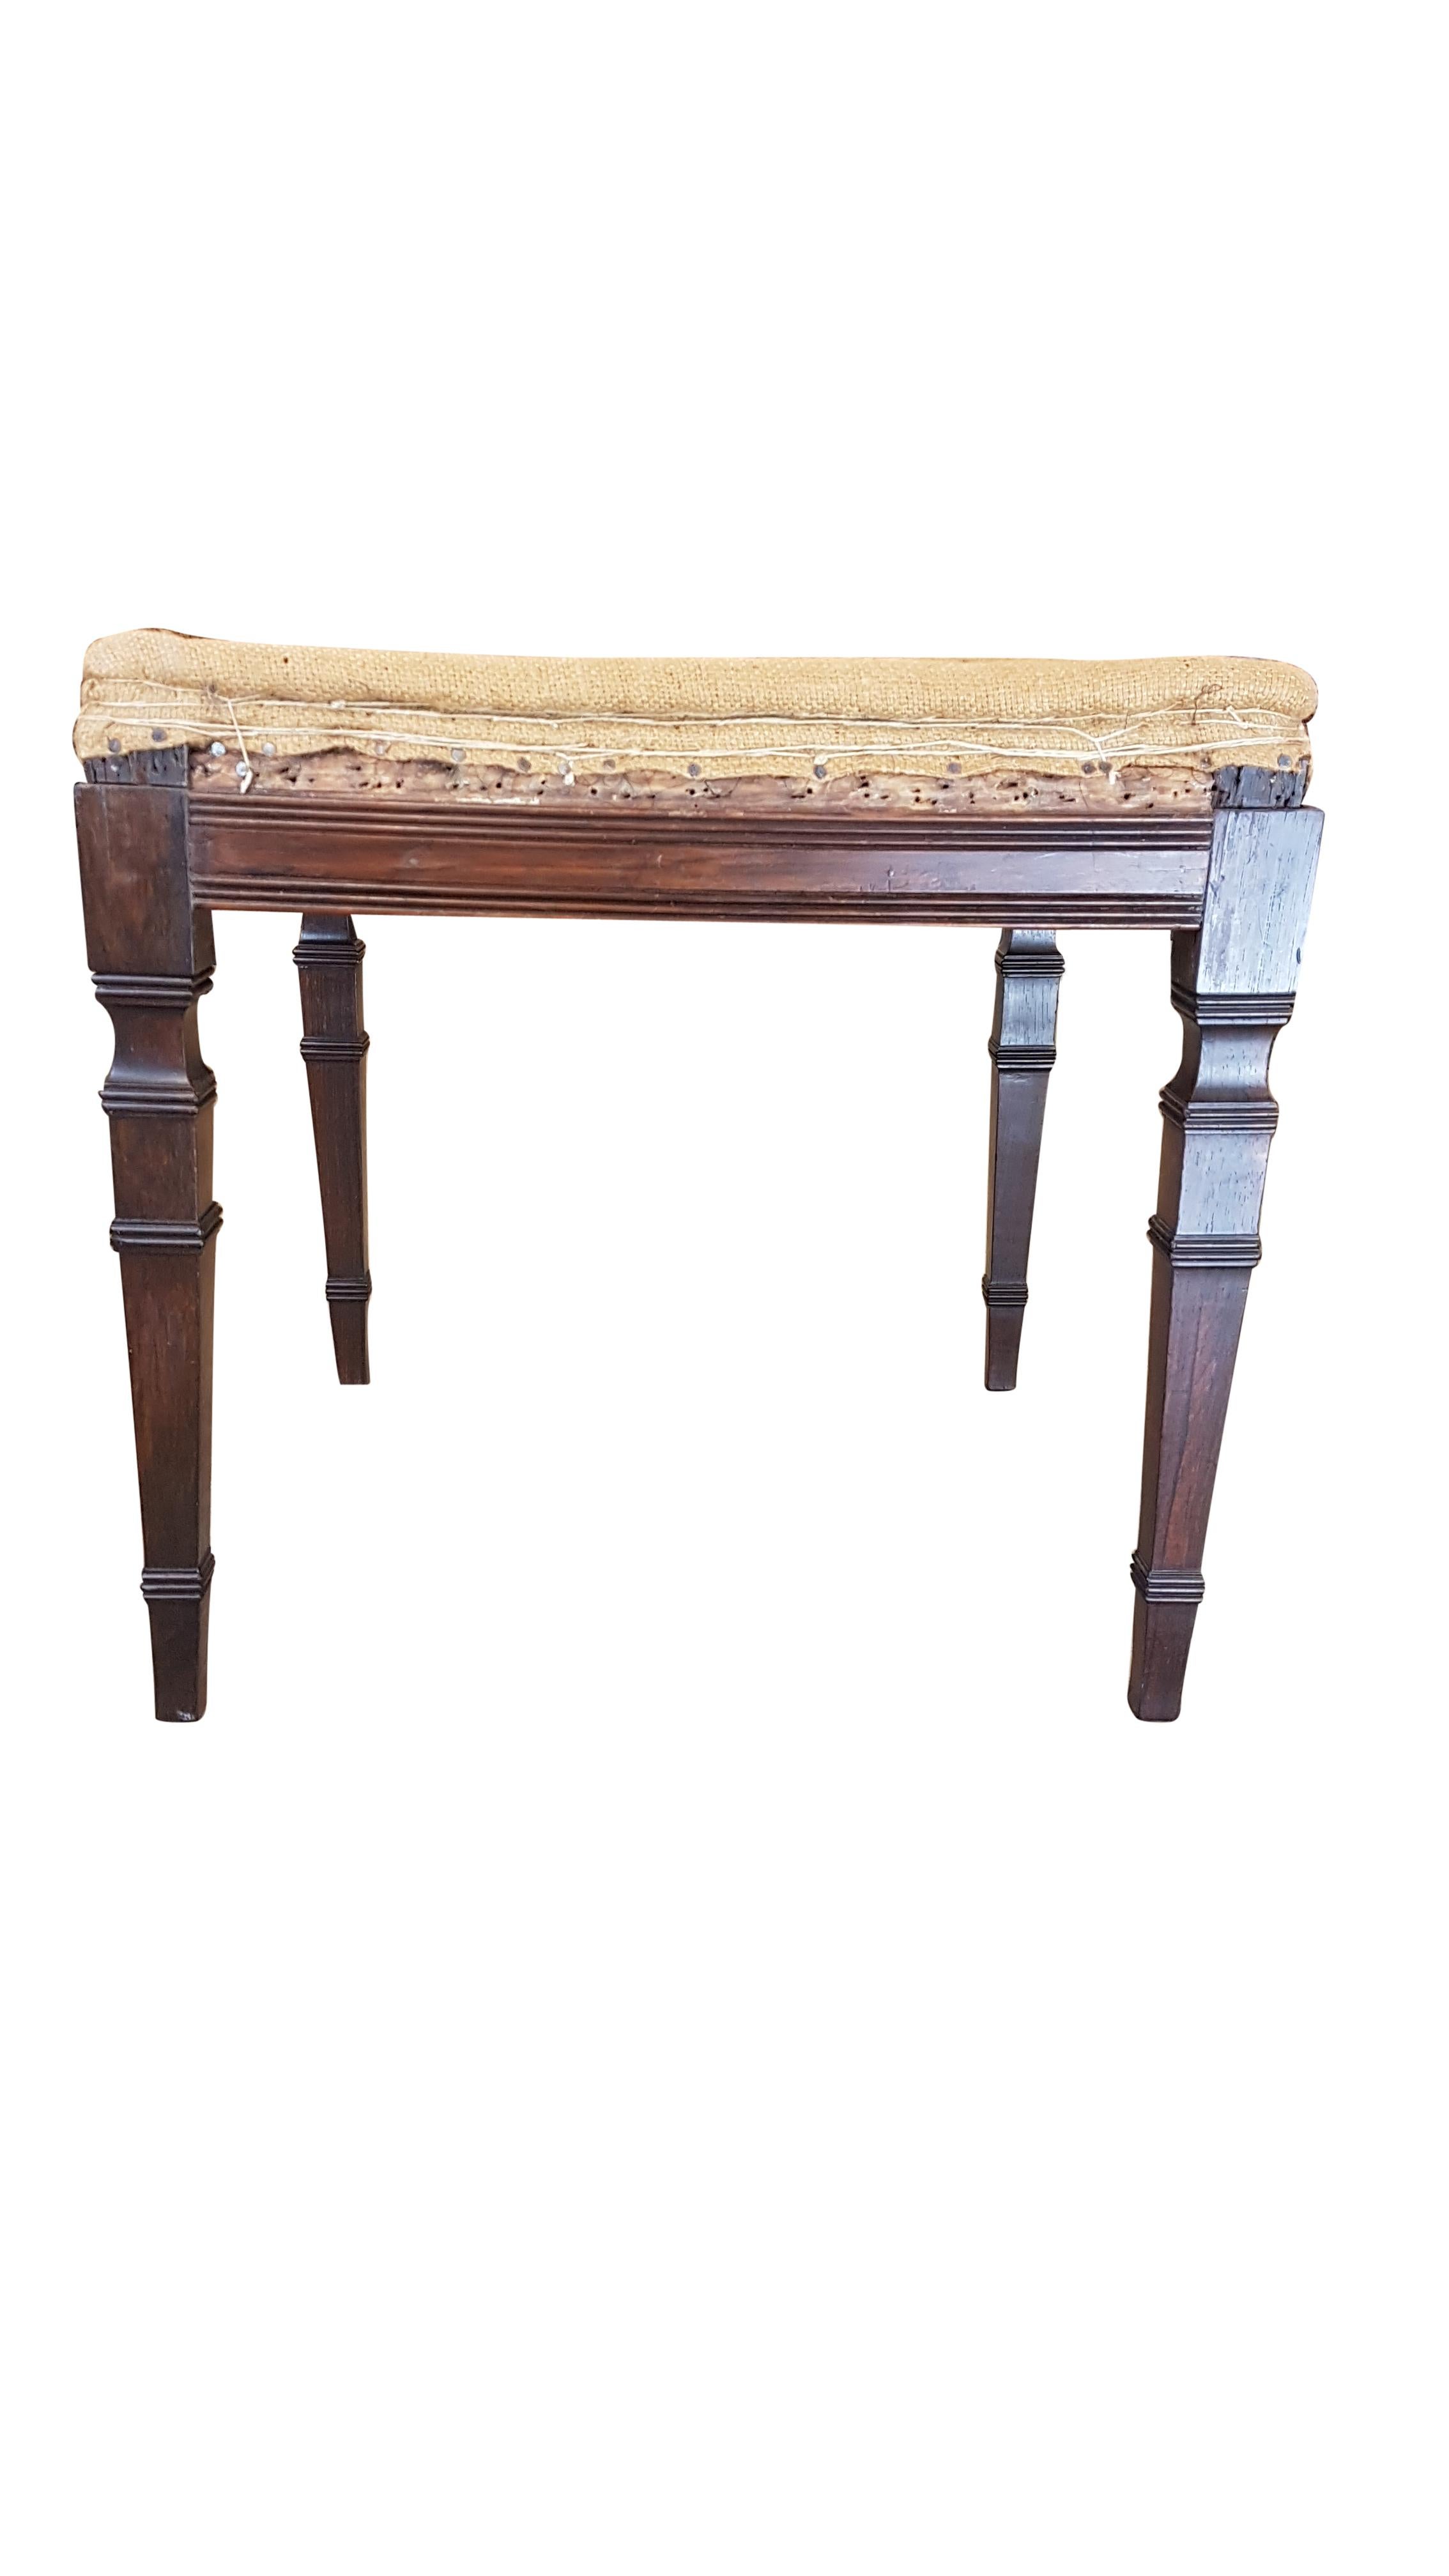 Late Victorian Late 19th Century Rosewood Stool by John Reid & Sons of Leeds